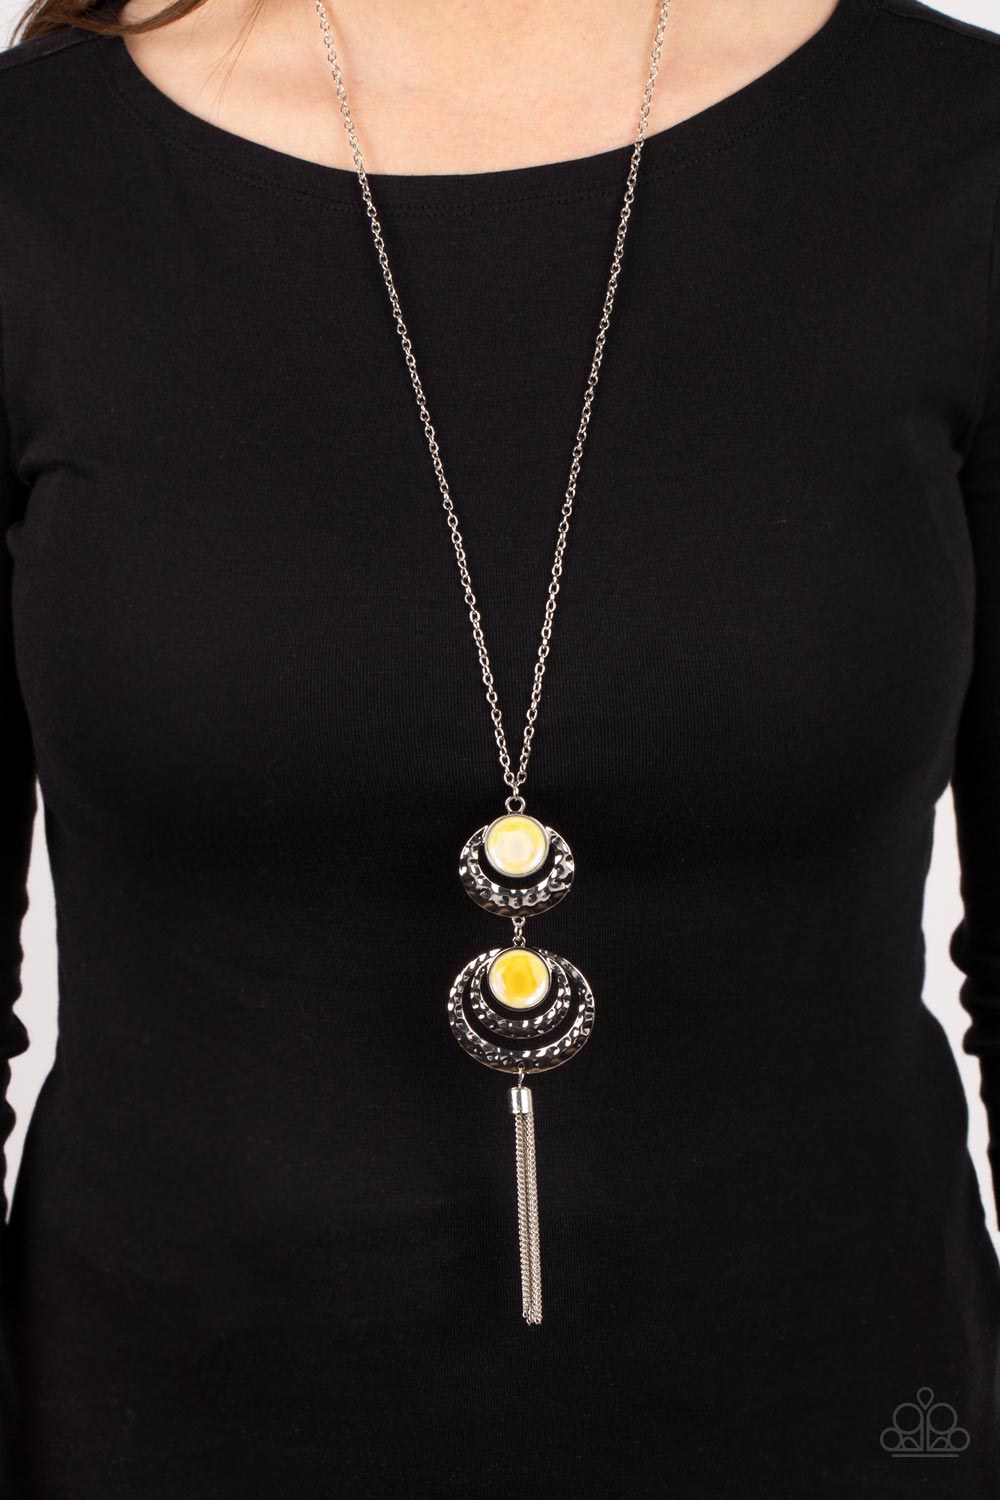 Paparazzi - Limitless Luster - Yellow Necklace